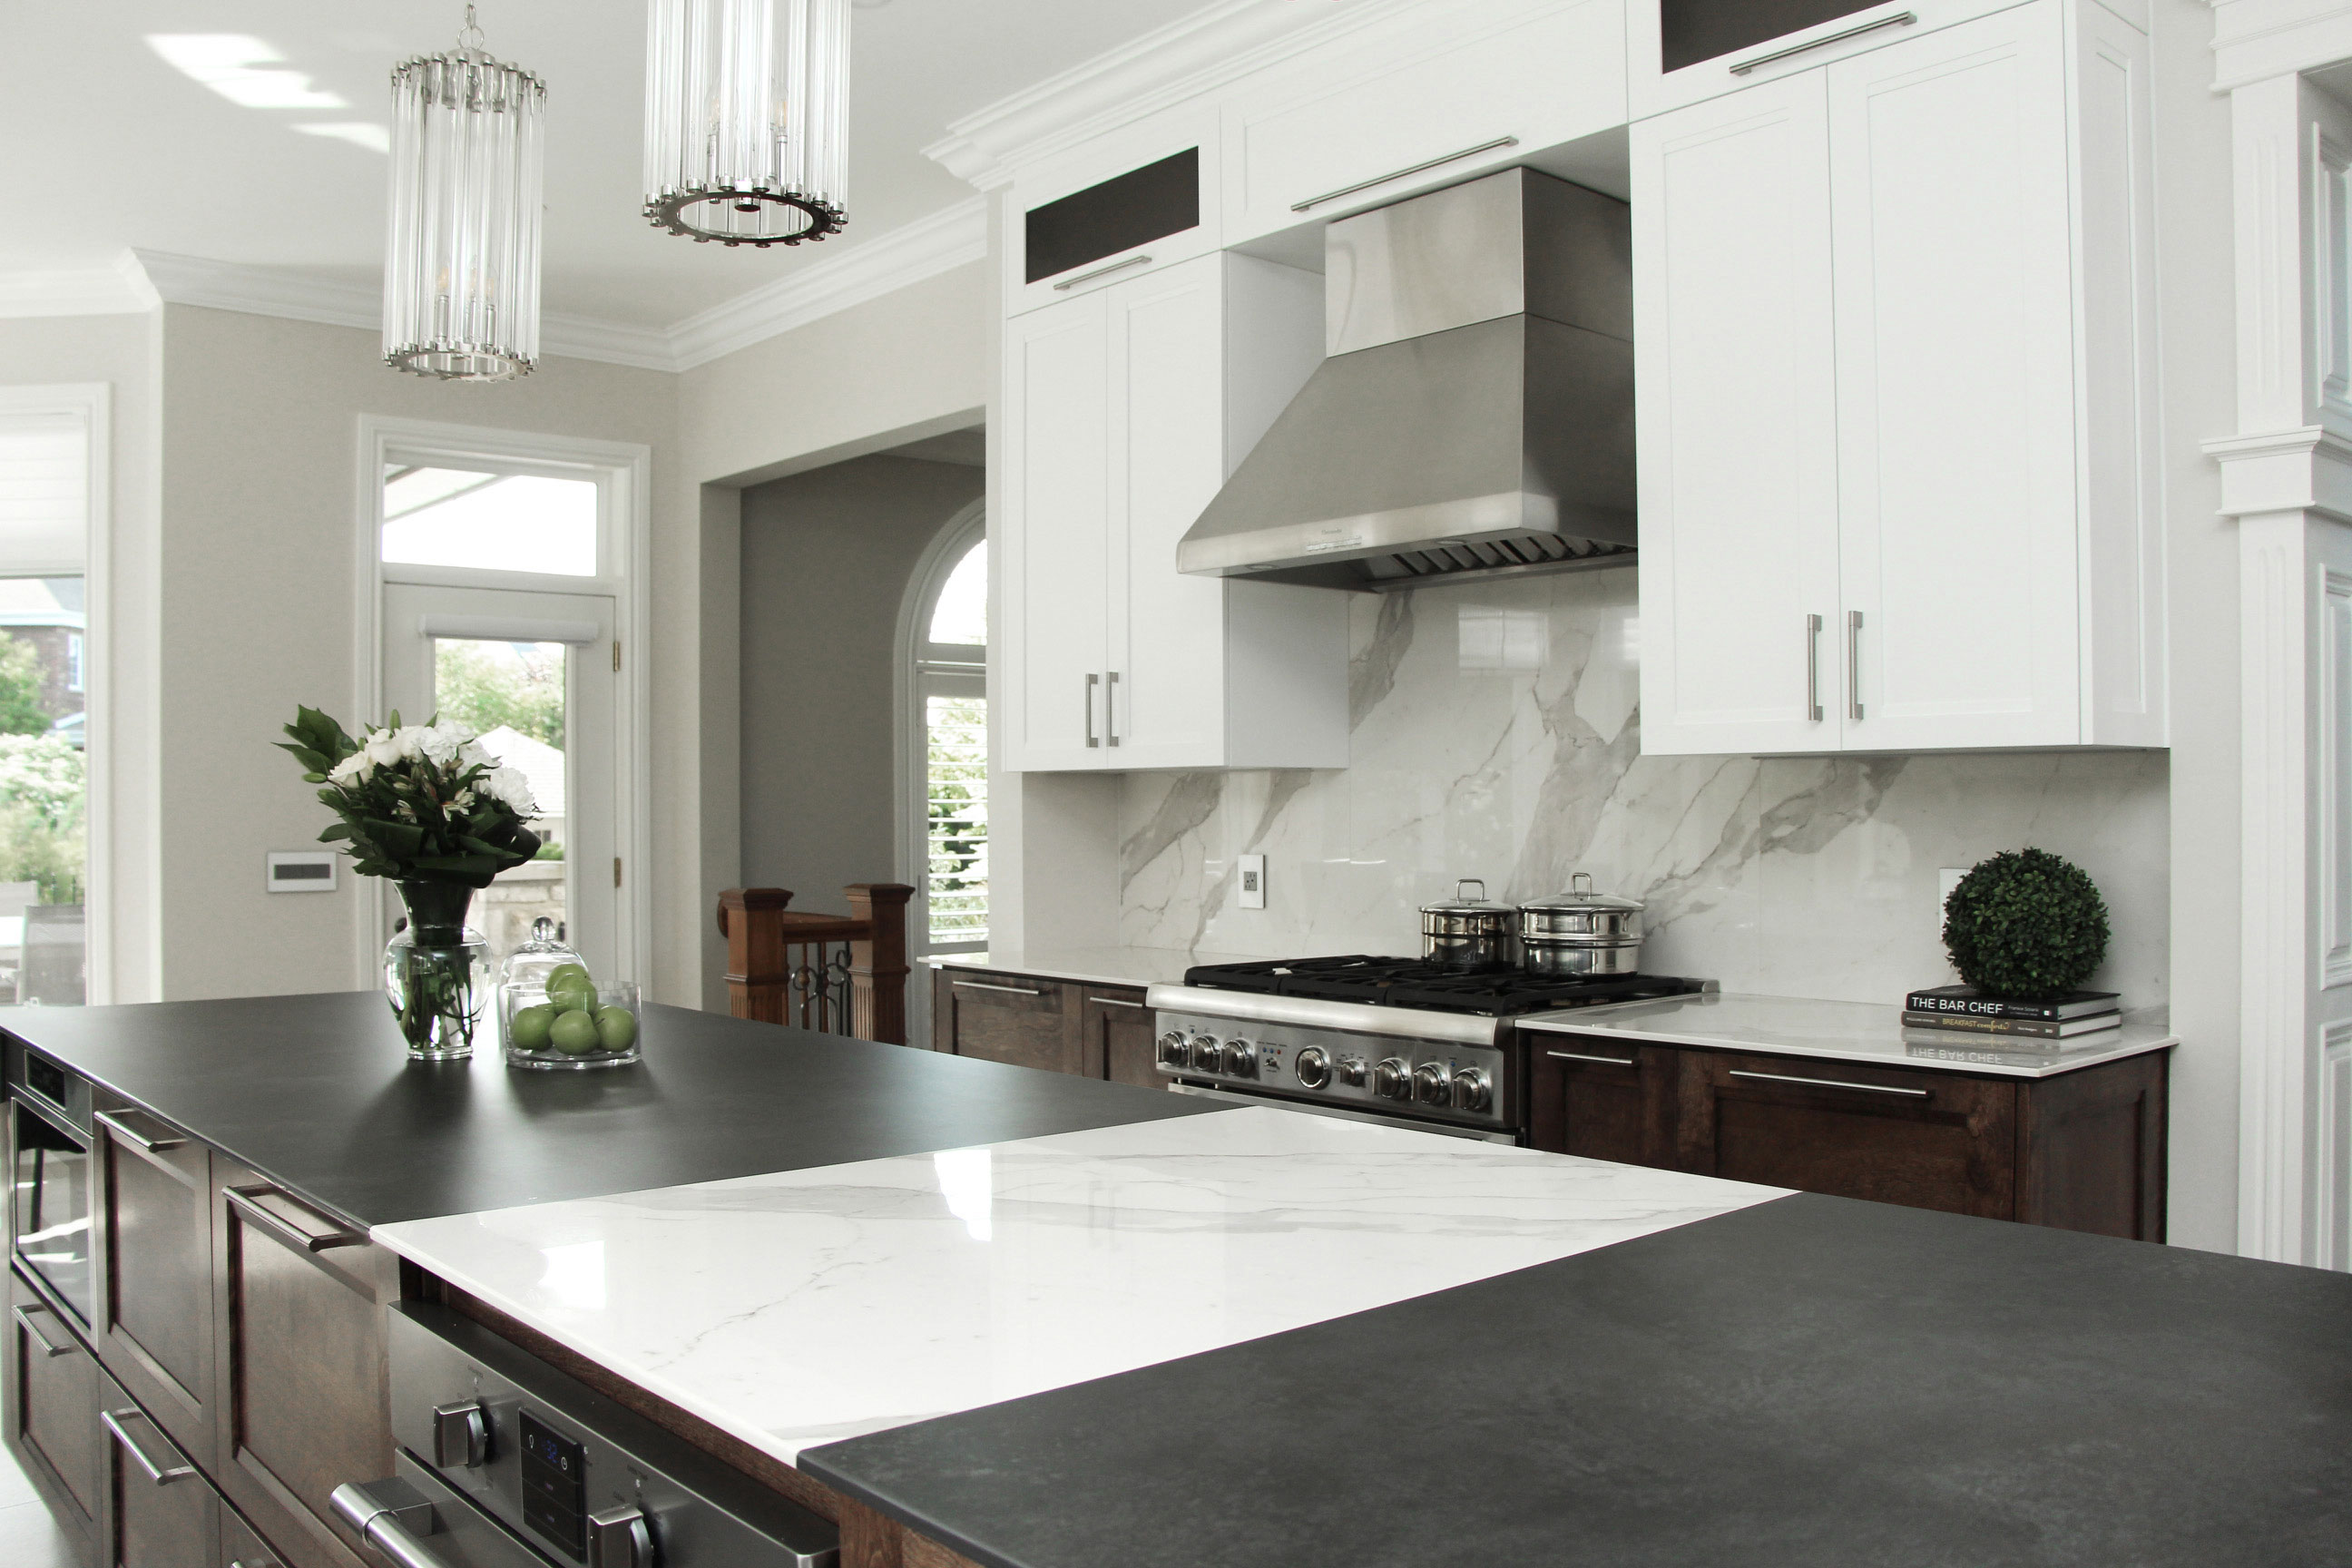 Stone Slab Countertops The 5 Best, Materials Used For Countertops